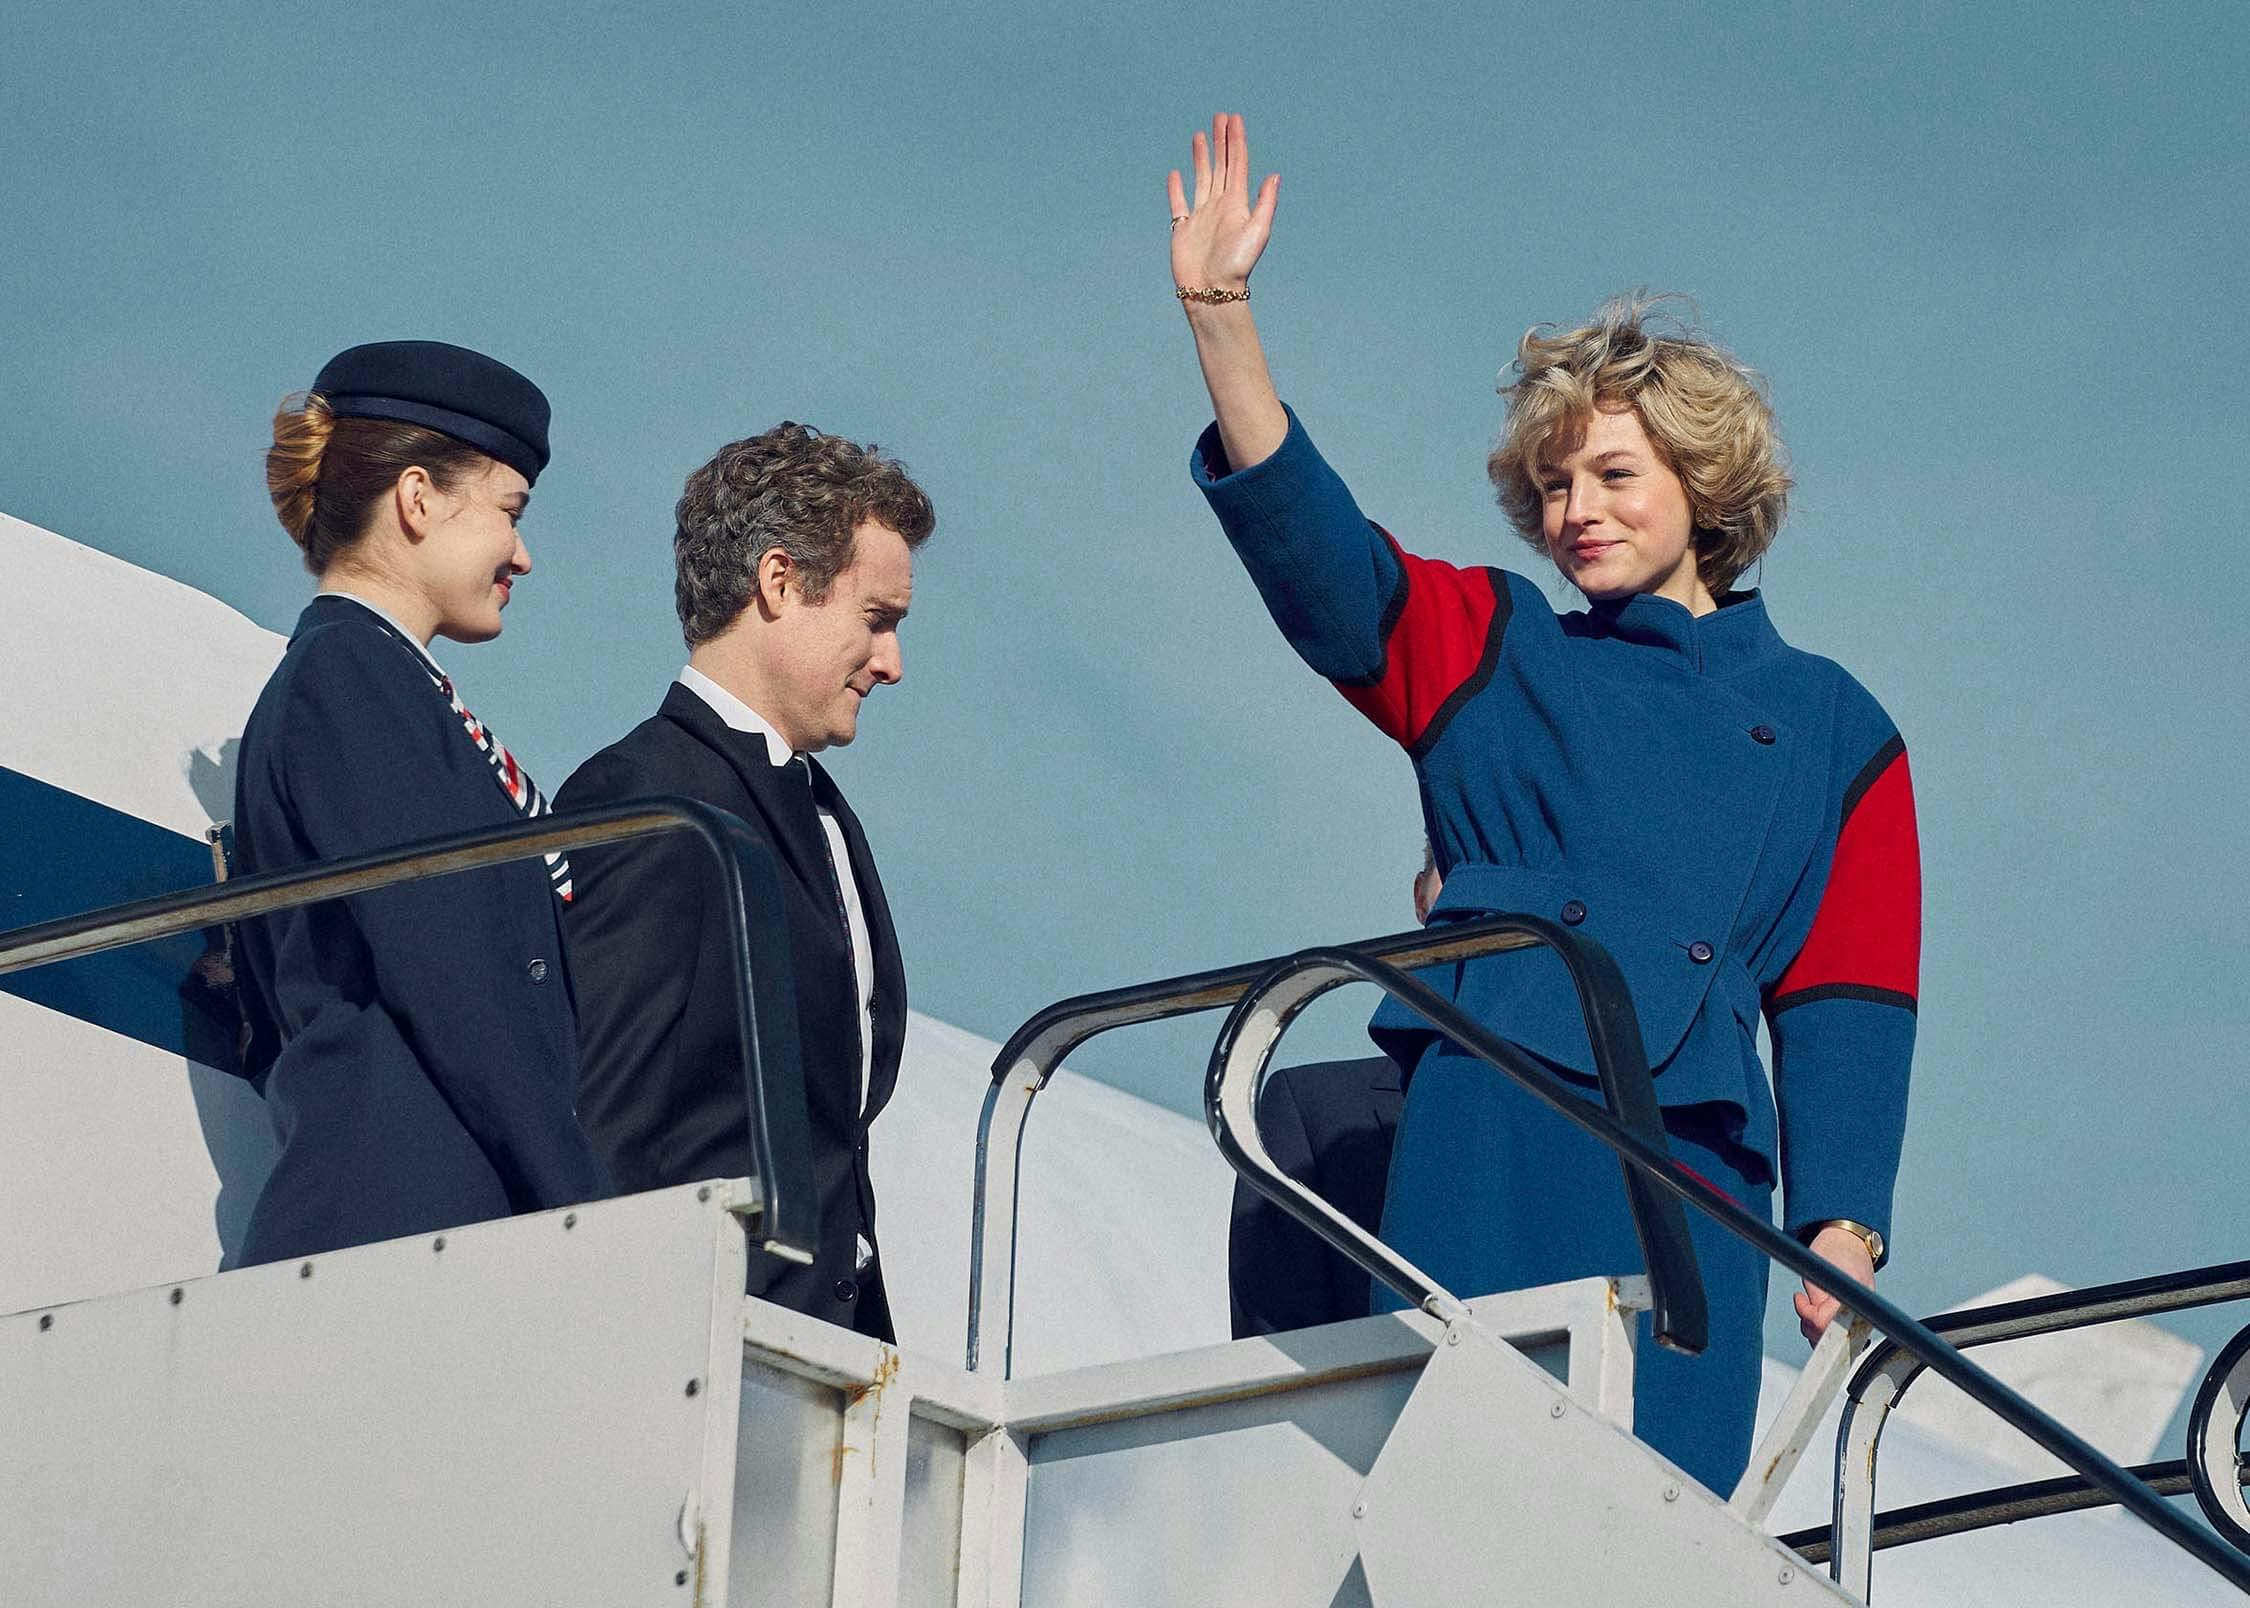 Diana (Emma Corrin) wears a red and blue suit as she exits a plane. Flanked by a man and a woman in dark suits, she waves to someone offscreen.